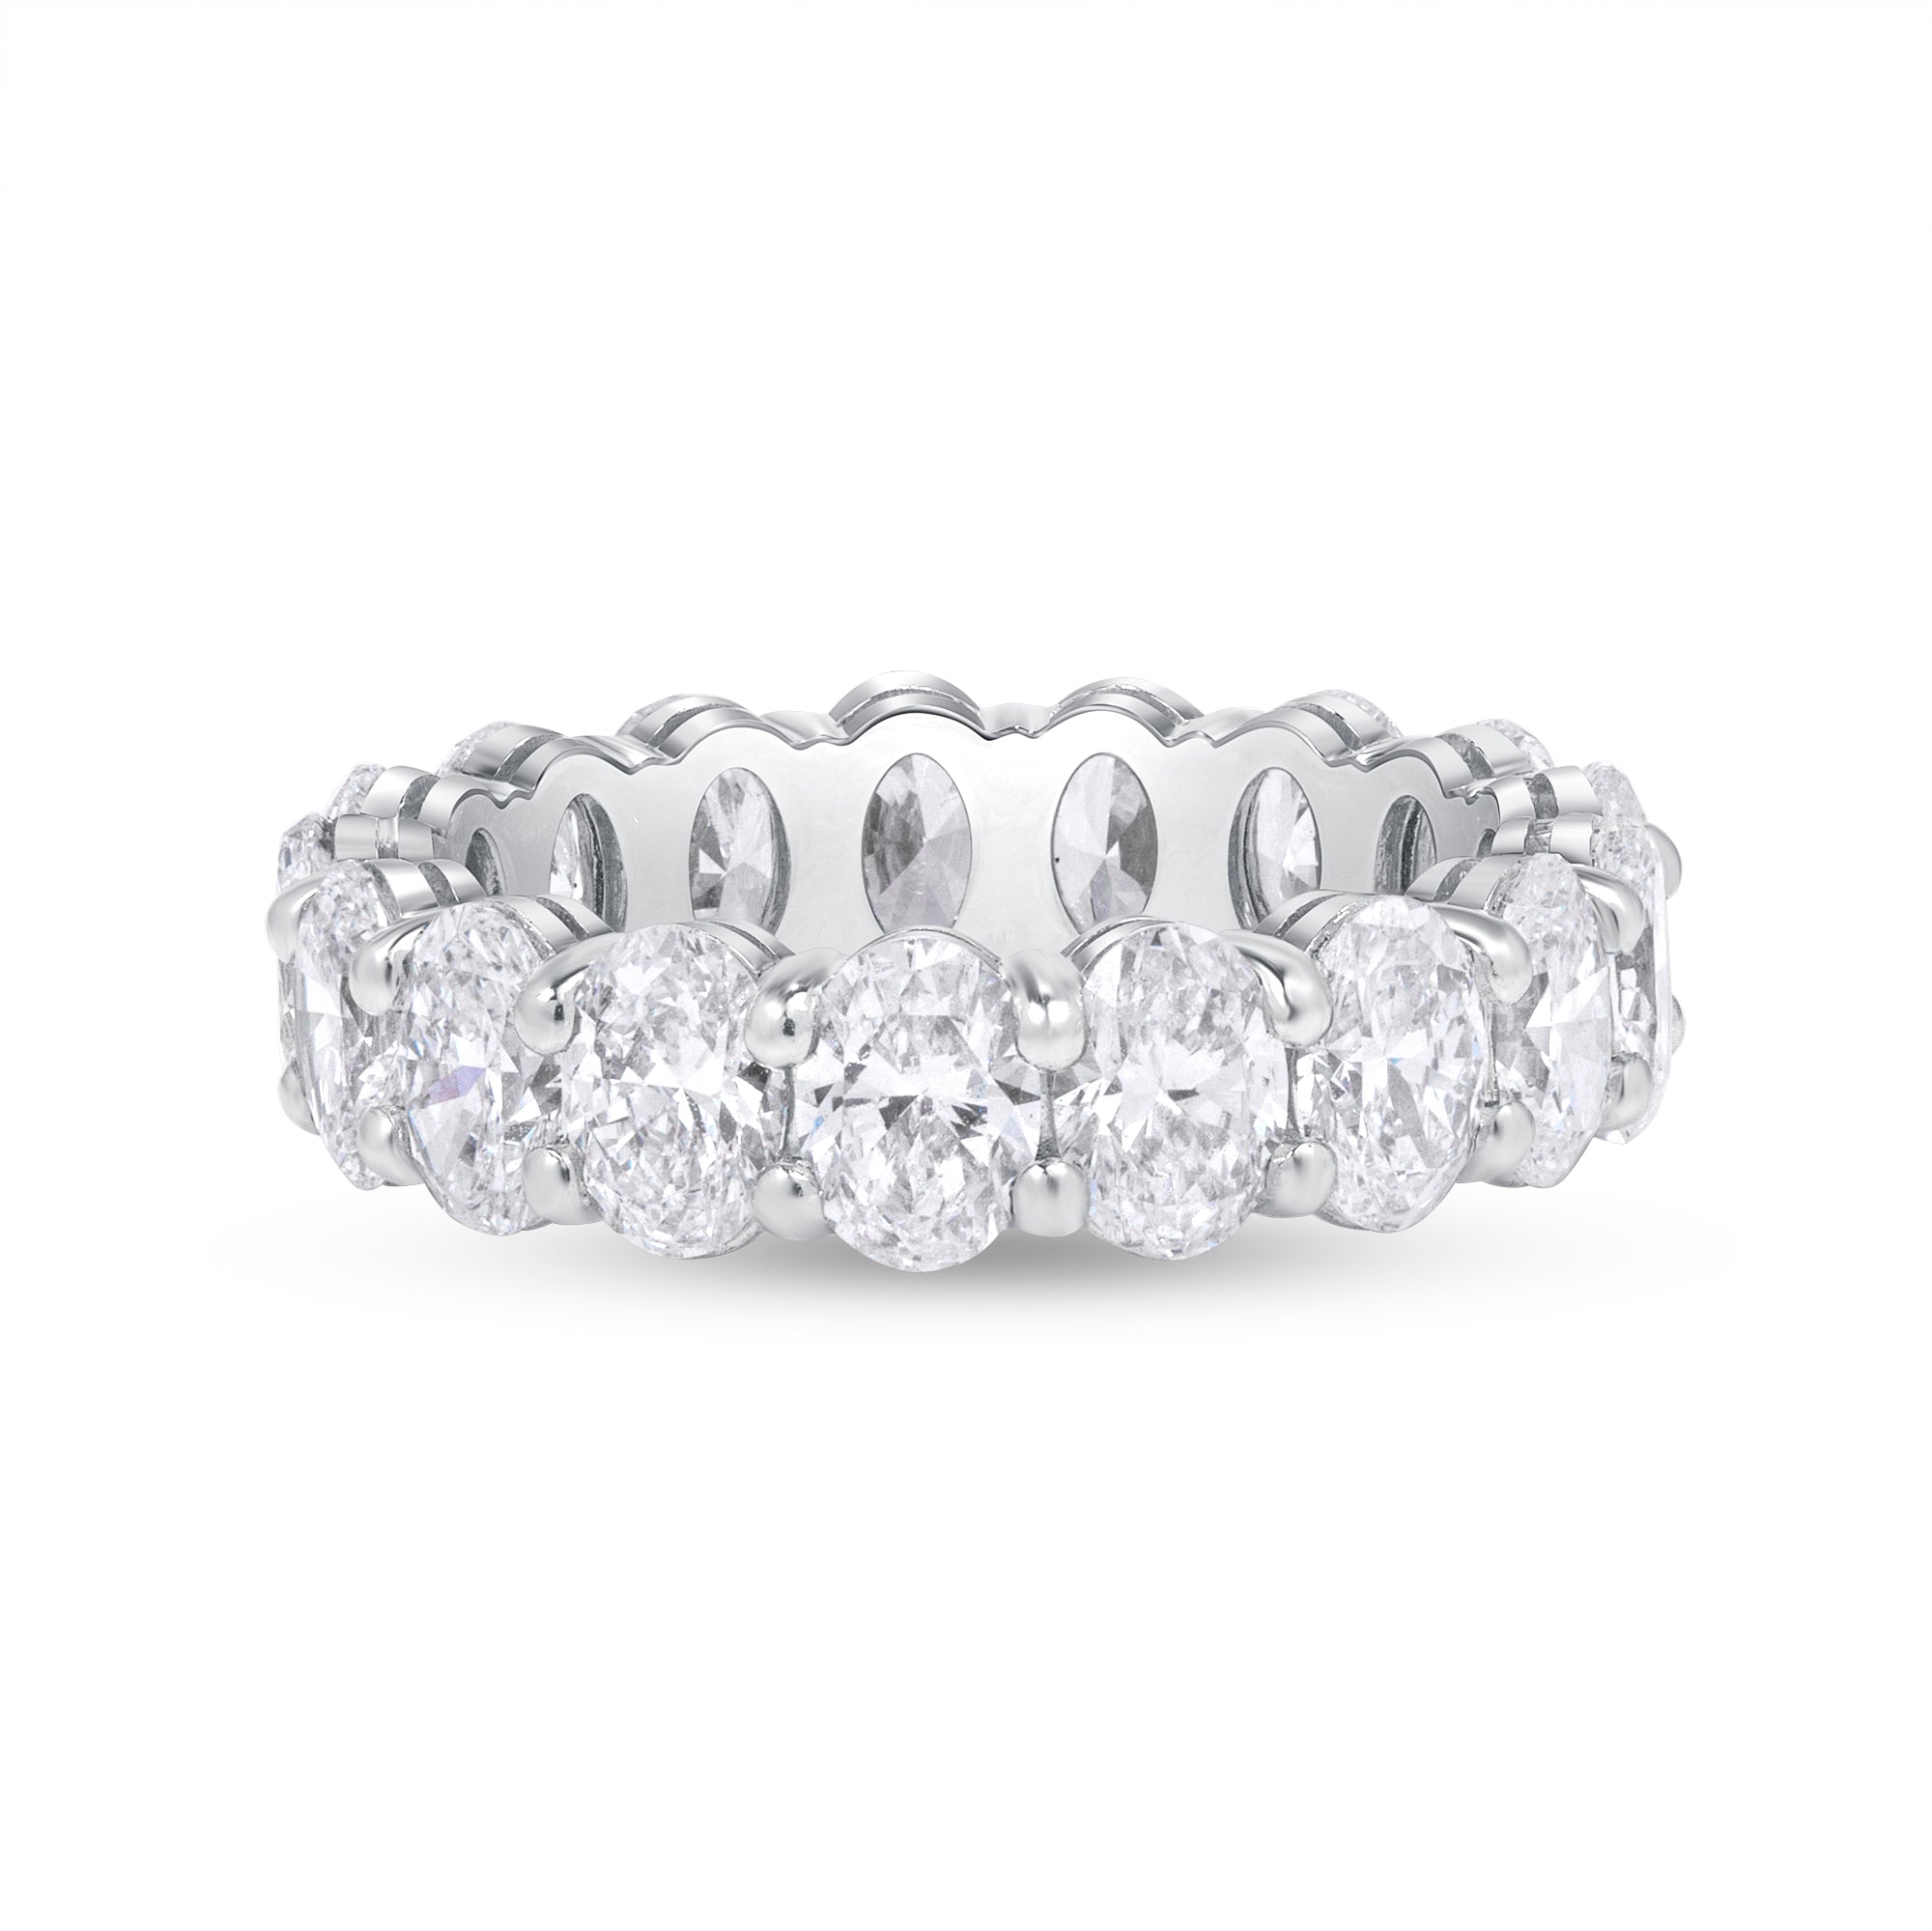 5.13ct Oval Cut Diamond Platinum Eternity Band, GIA Certified